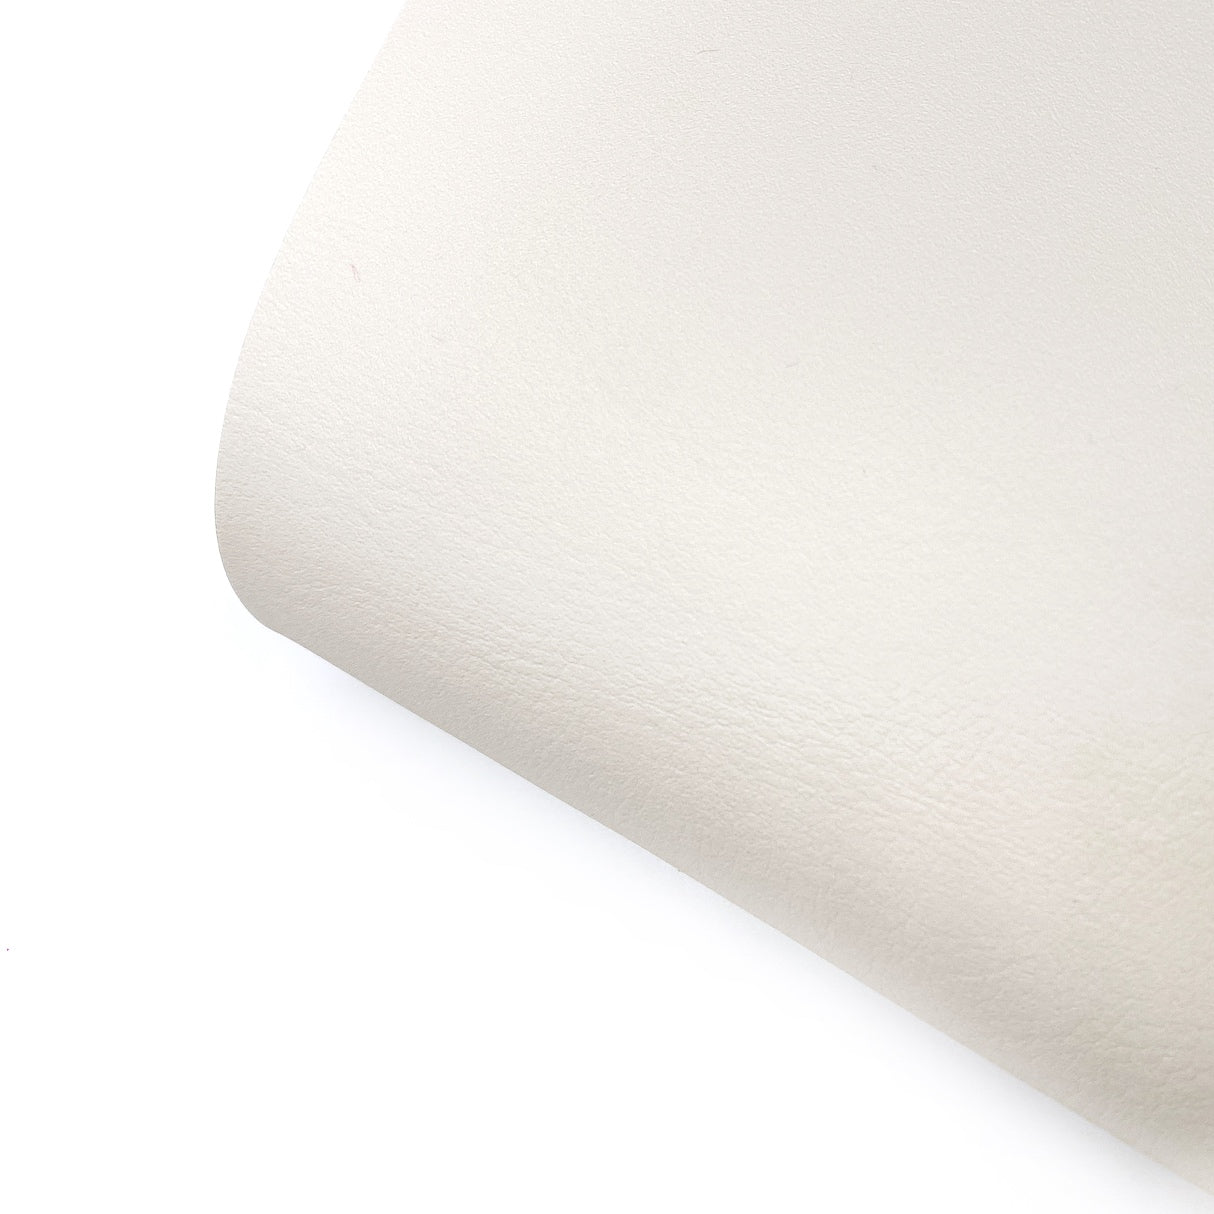 Stay Neutral Core Premium Faux Leather Fabric Sheets